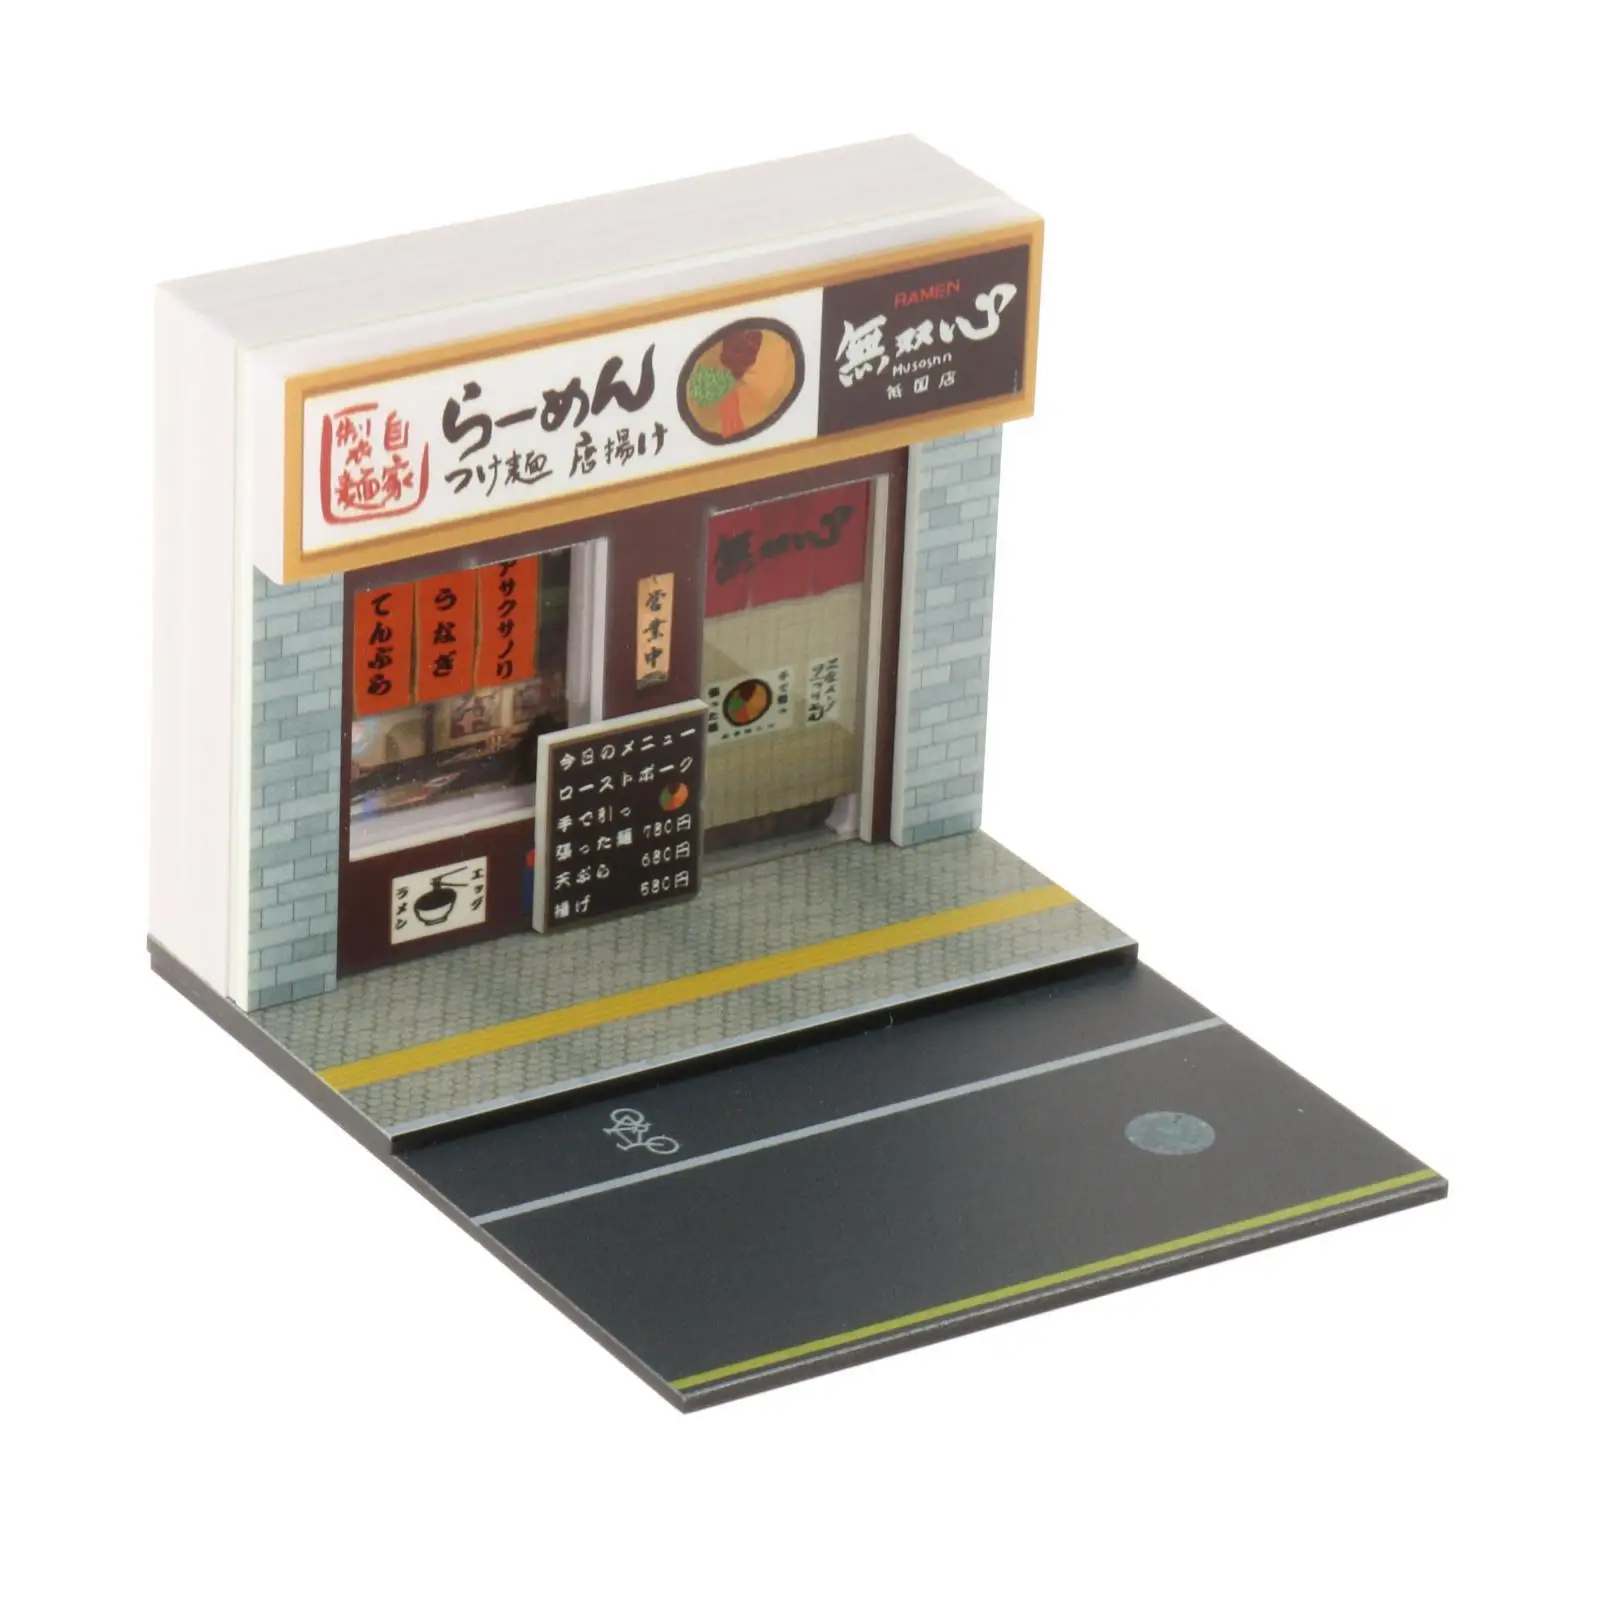 1/64 Scenery Diorama, Models Scenery for Model Cars, with Light Backdrop for